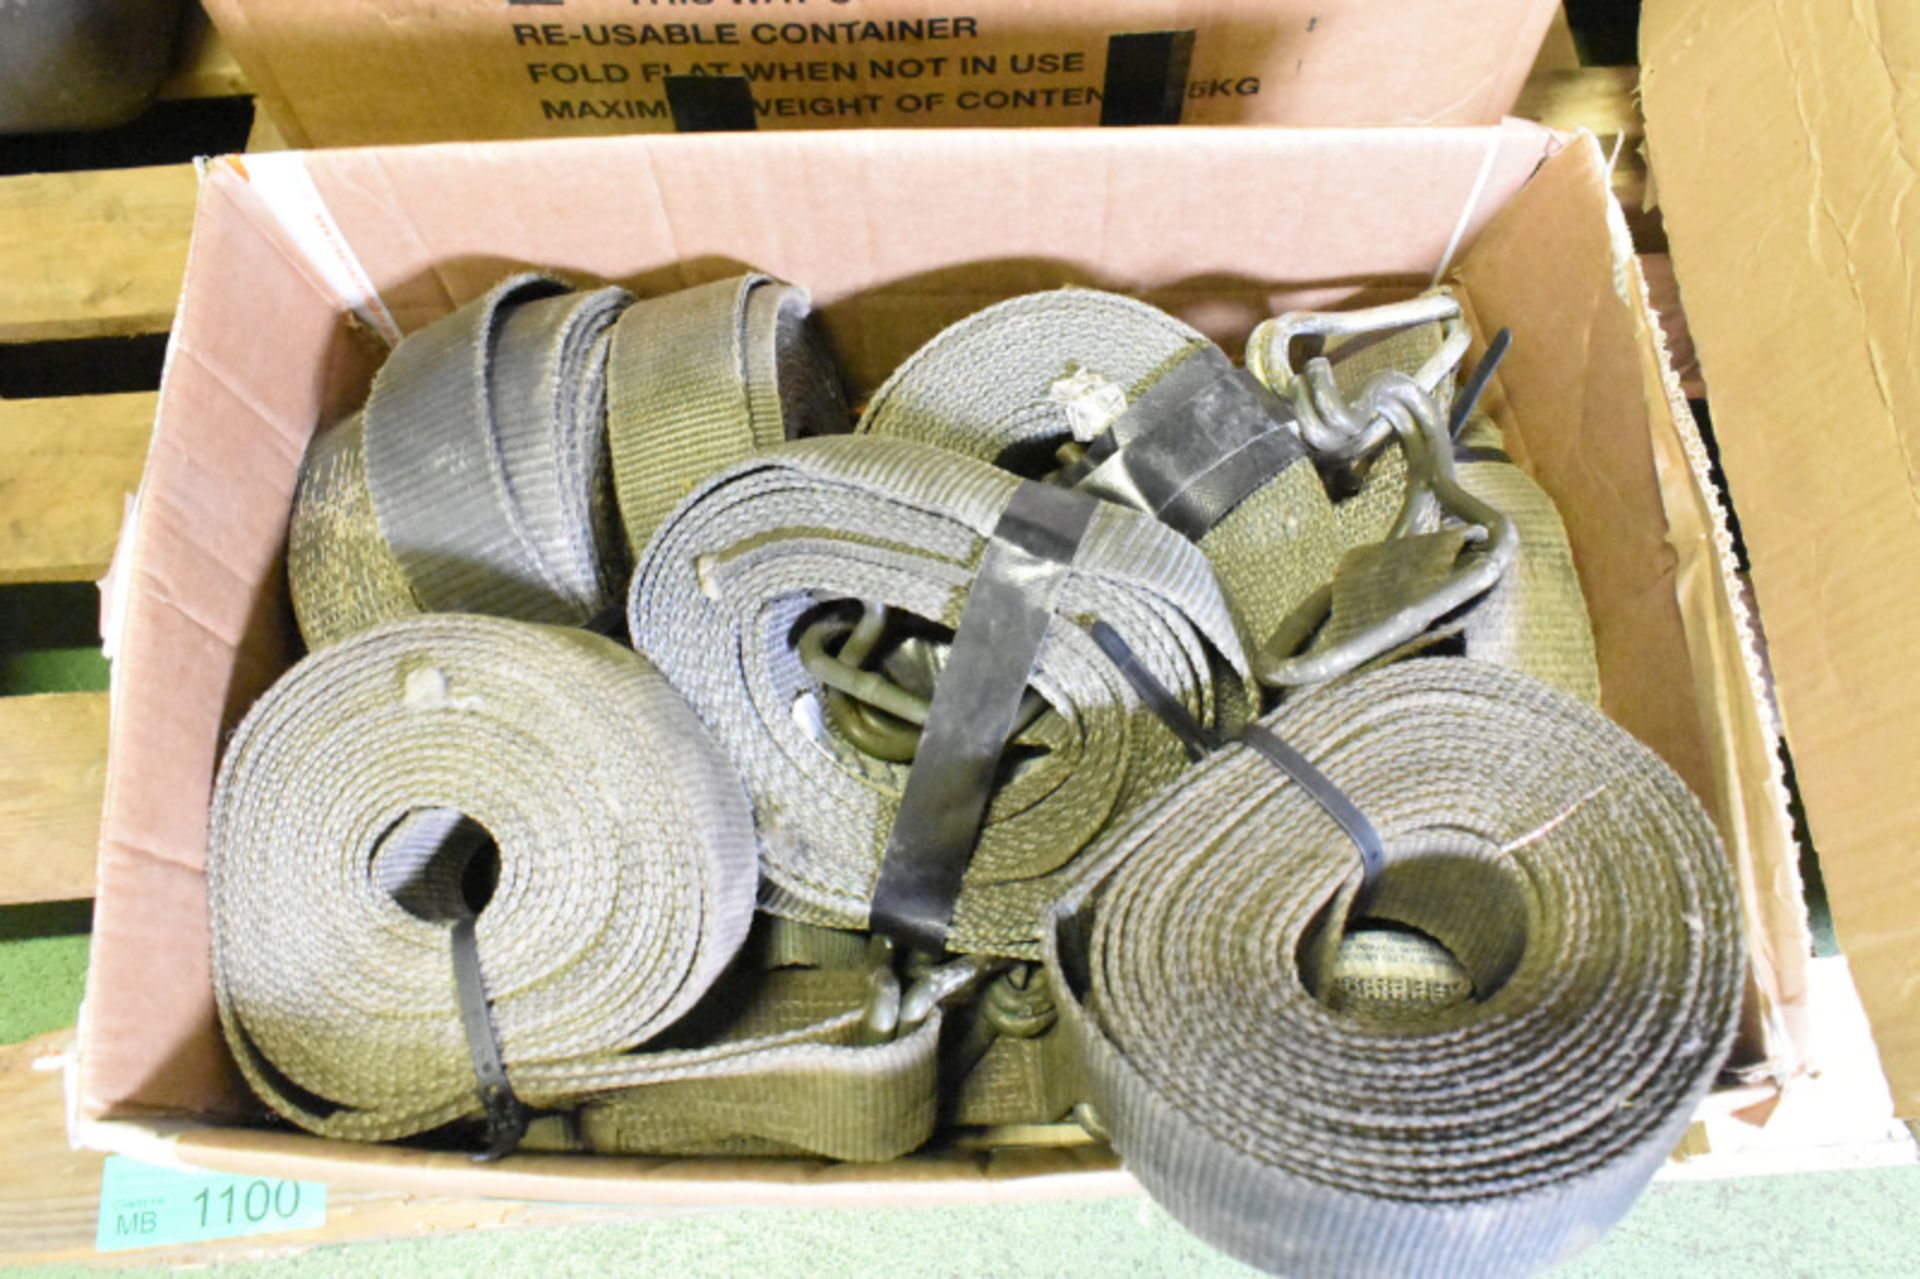 Lorry tie down ratchet straps - 15 in total - Image 2 of 2